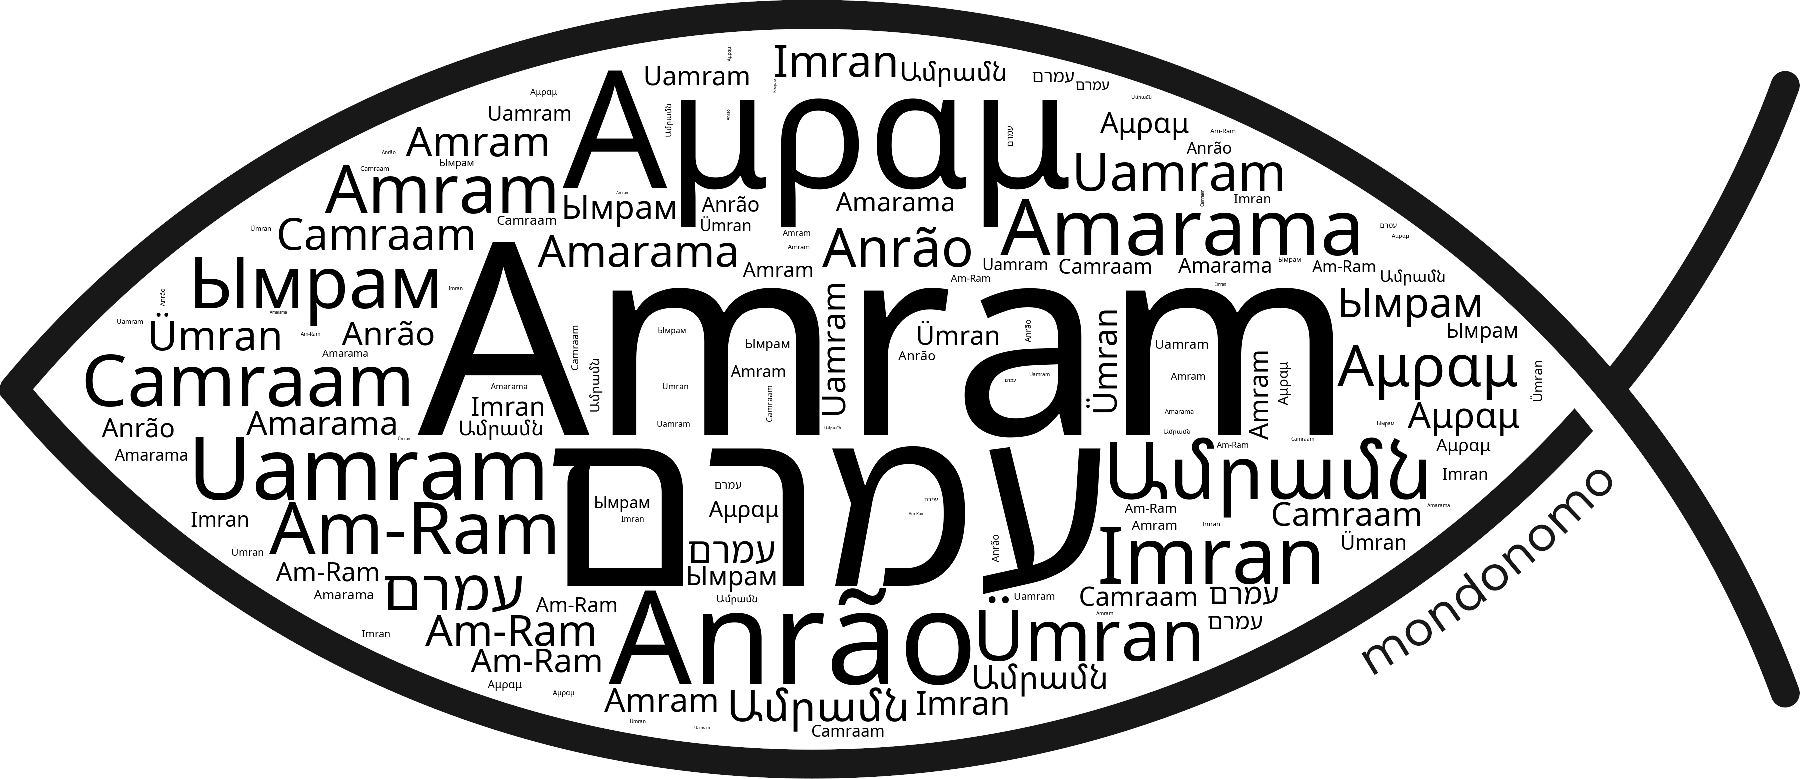 Name Amram in the world's Bibles